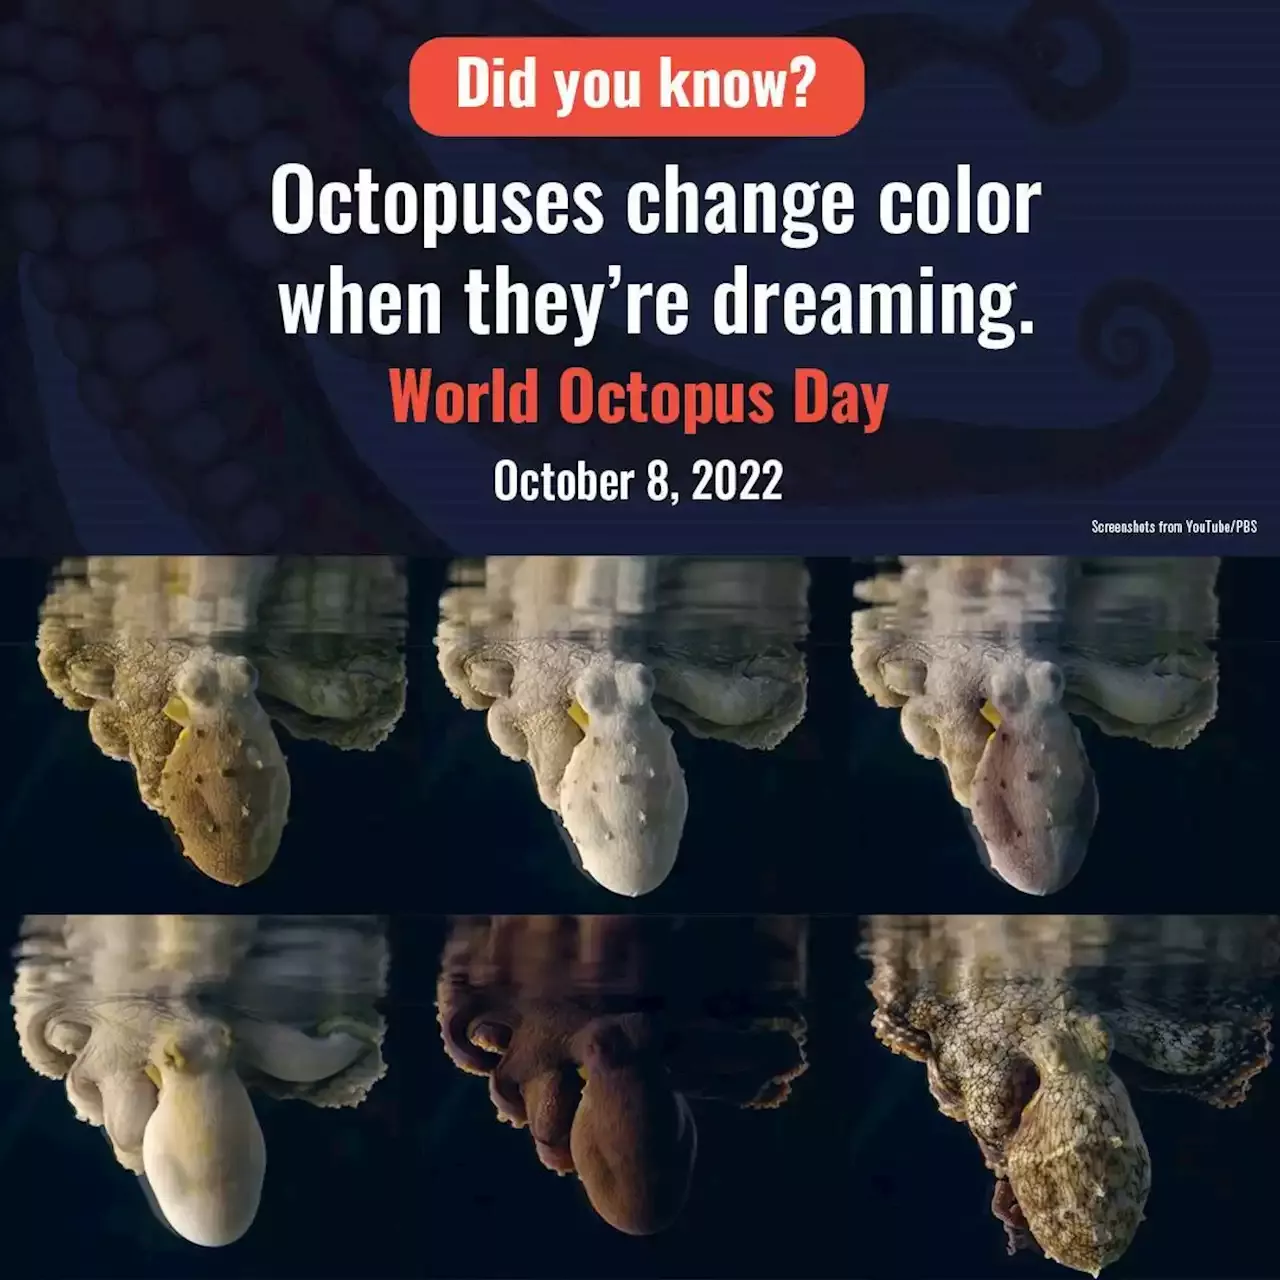 it-s-world-octopus-day-scientists-from-the-brain-i-it-s-world-octopus-day-scientists-from-the-brain-i-1578528367405854720.webp